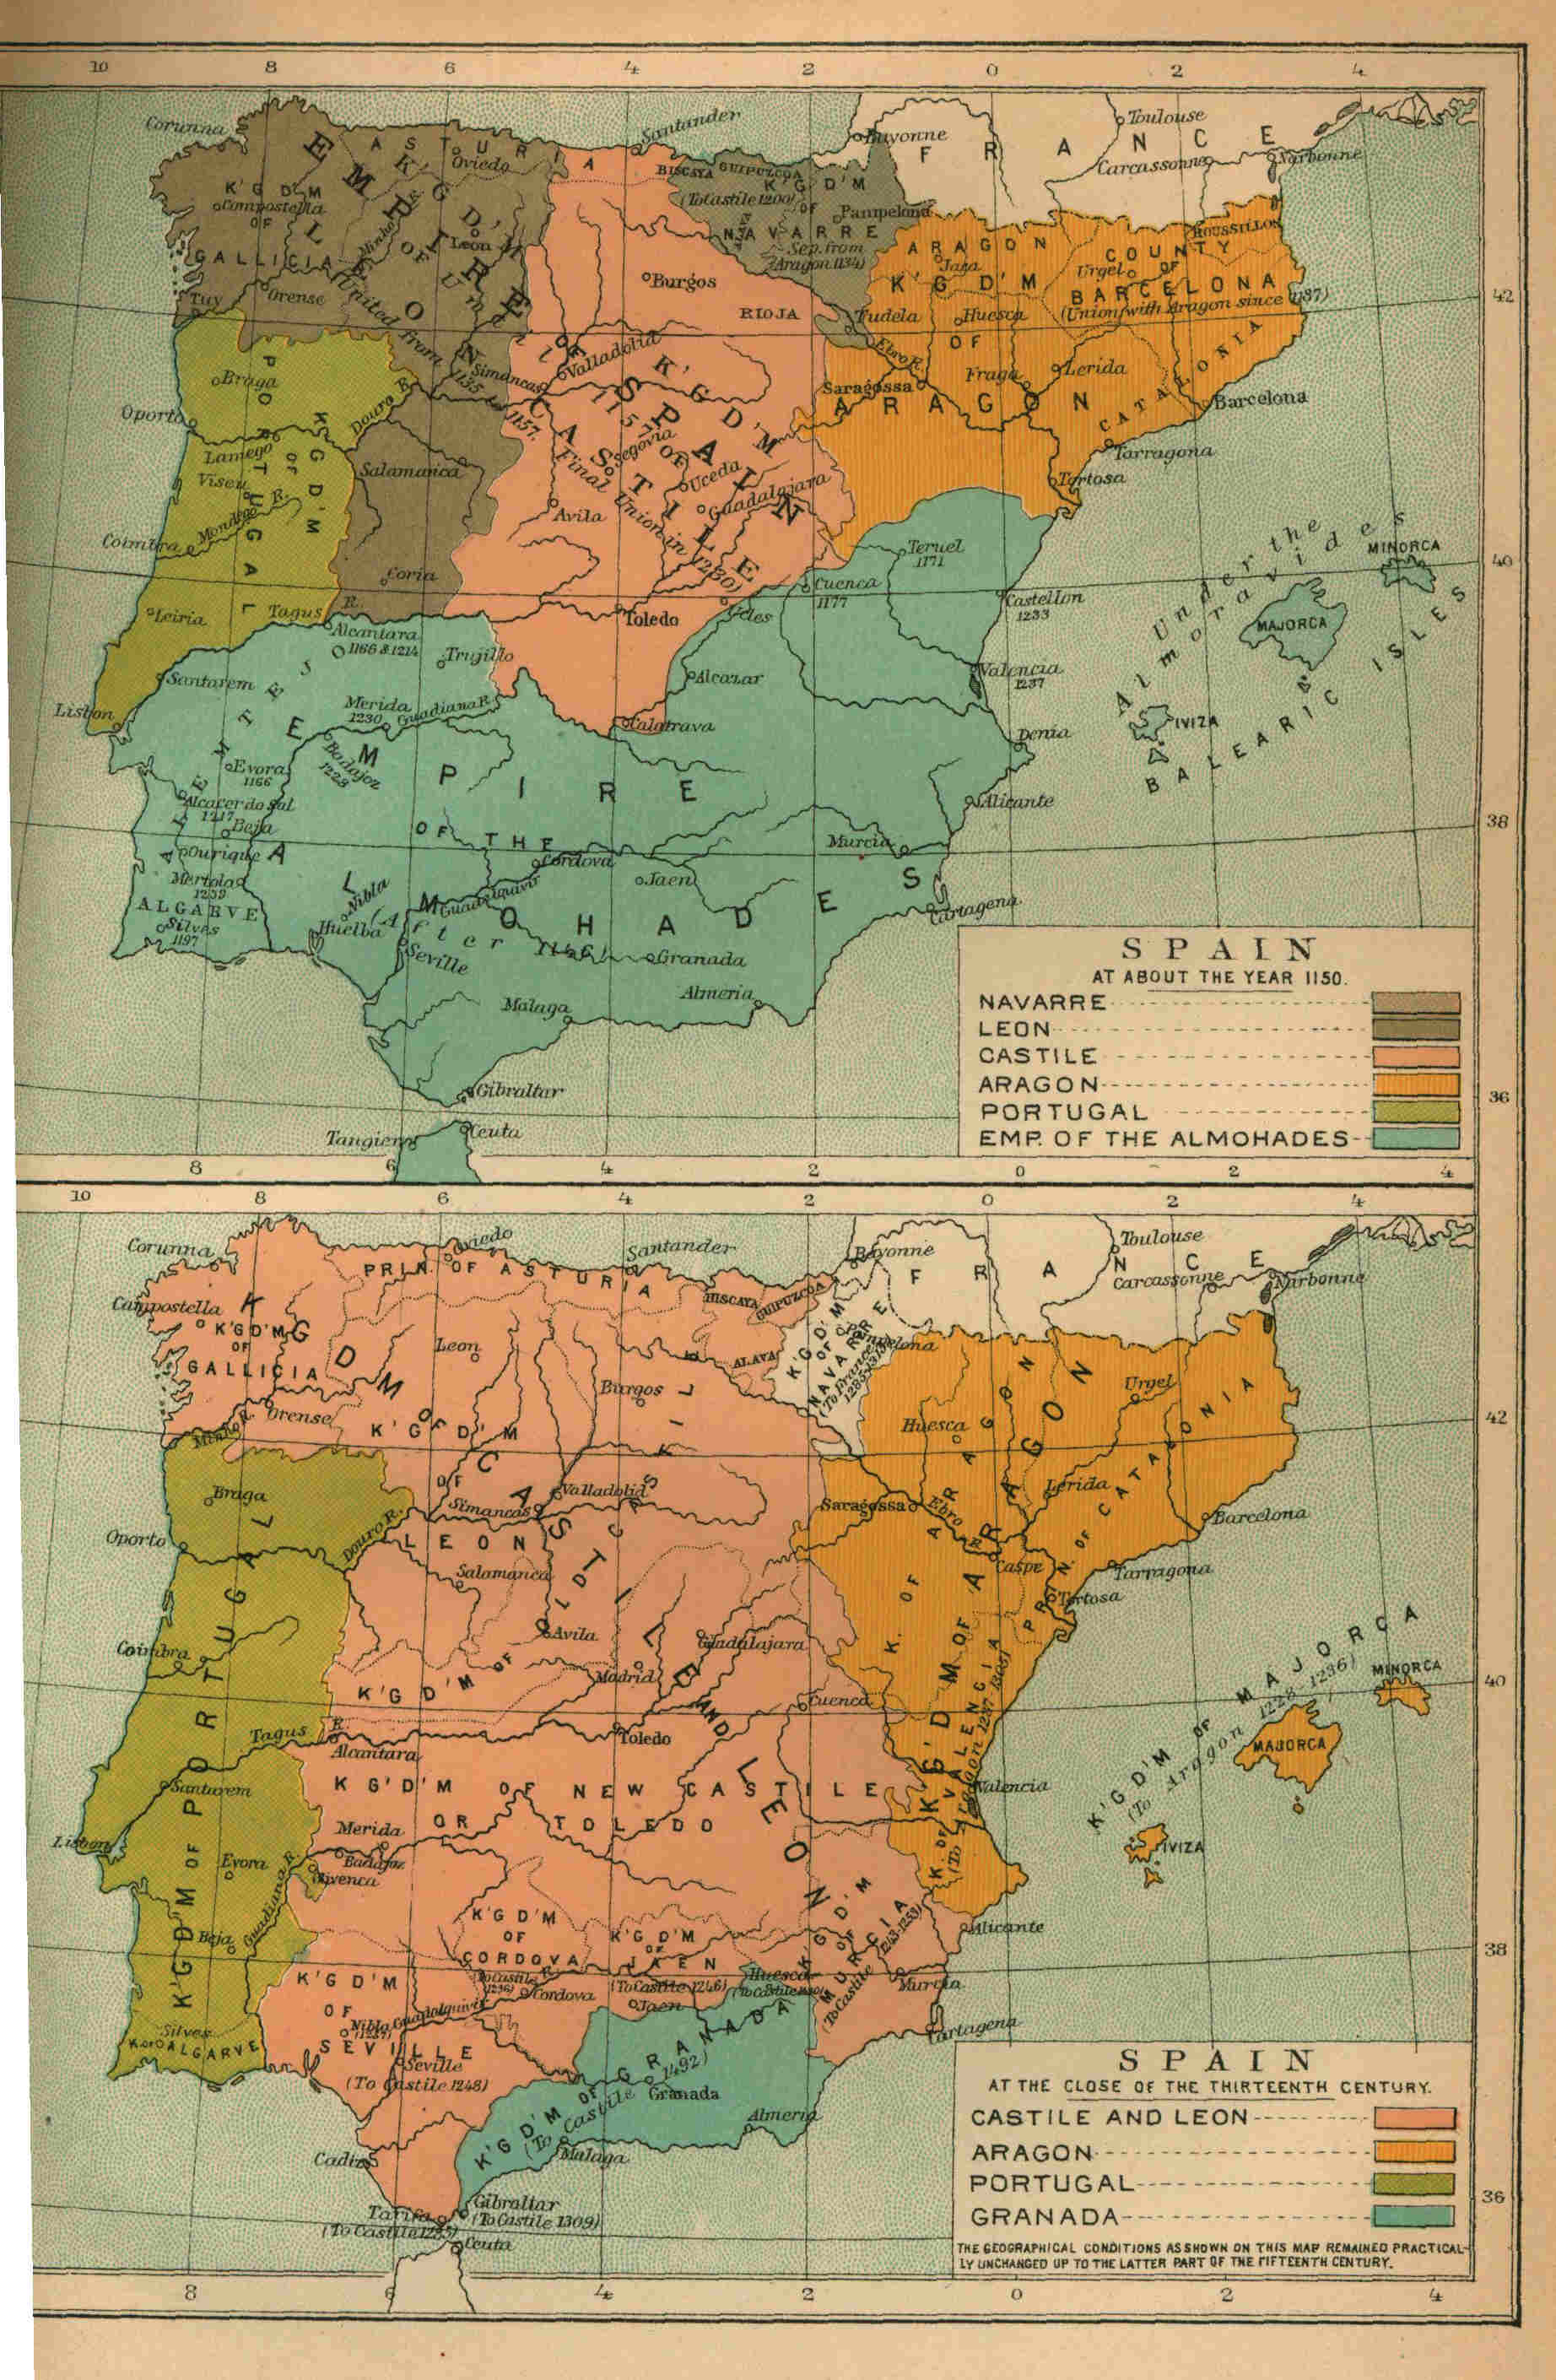 SPAIN AT ABOUT THE YEAR 1150.